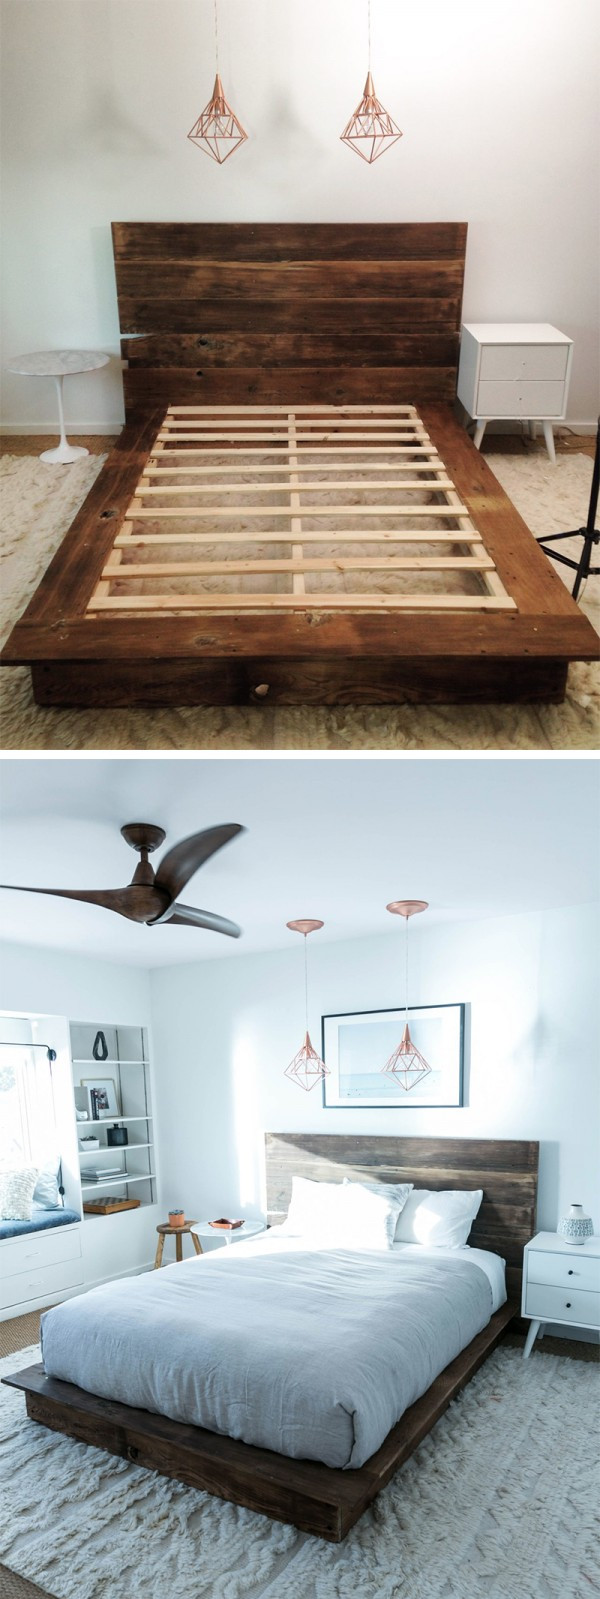 DIY Wood Bed Platform
 45 Easy DIY Bed Frame Projects You Can Build on a Bud